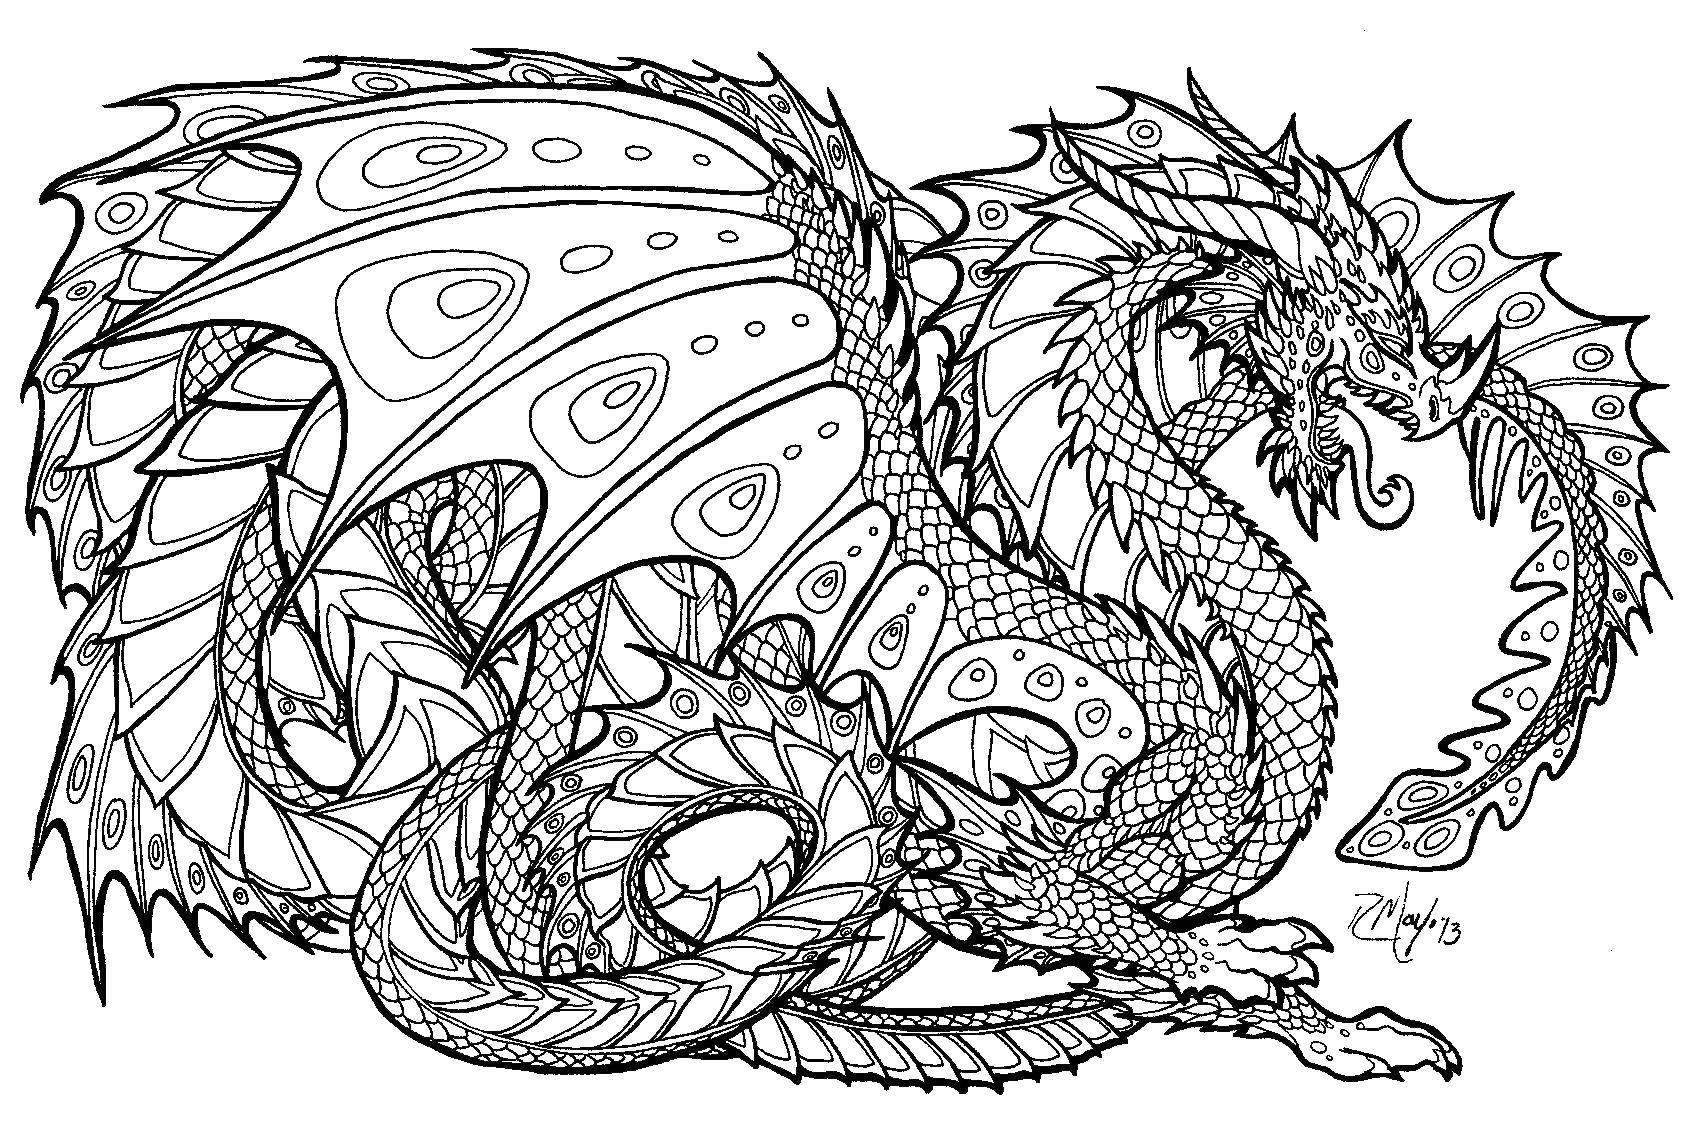 Coloring Flying dragon and patterns. Category the dragon. Tags:  dragon, wings, patterns.